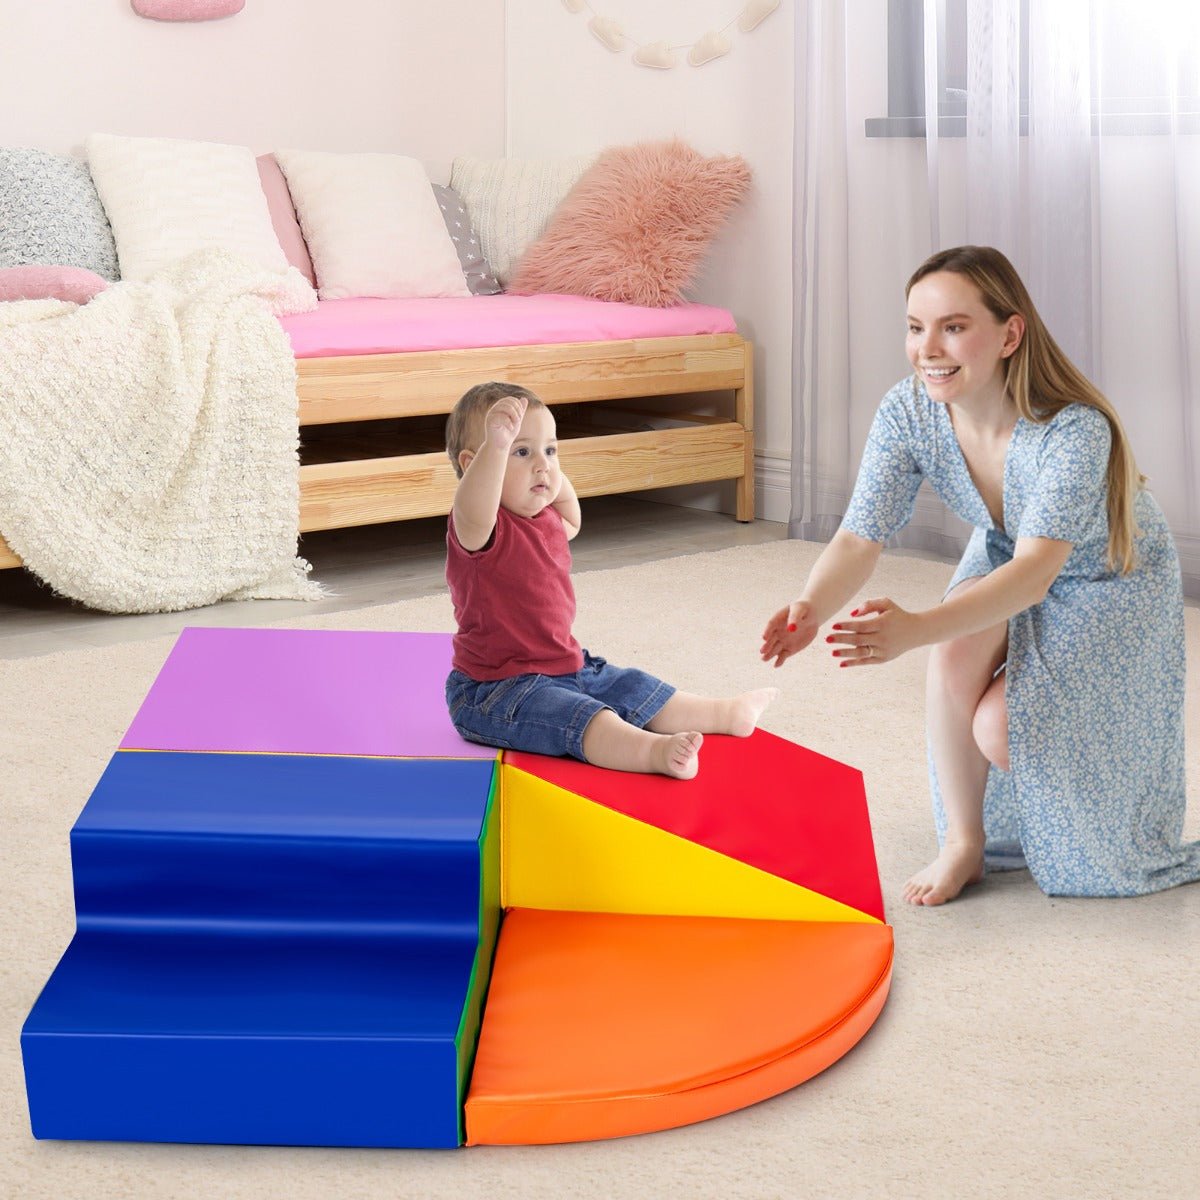 colourful Educational Playset for Babies